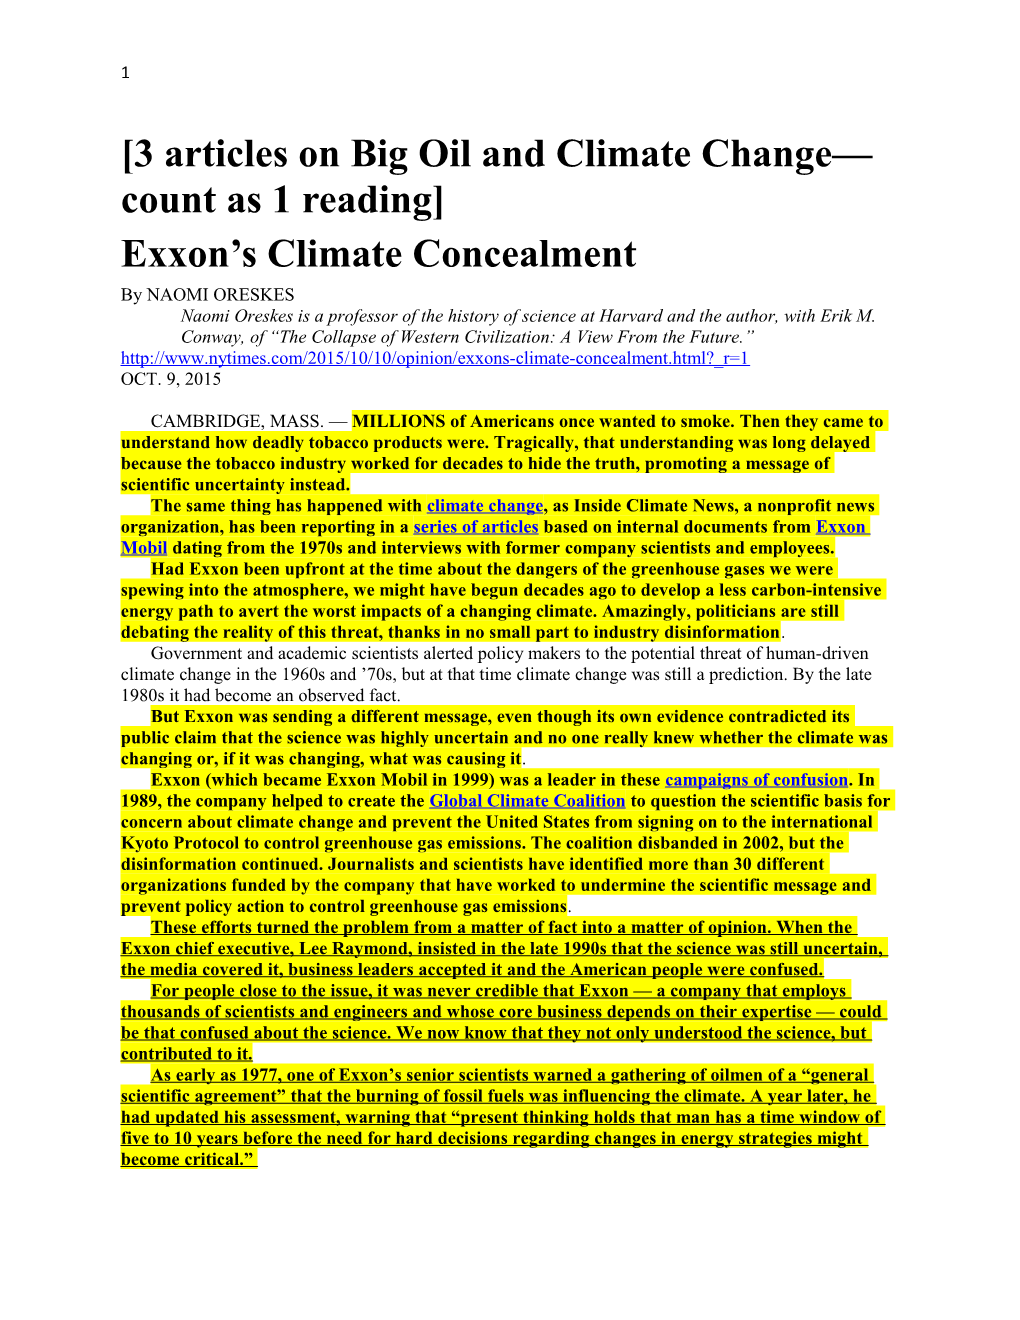 3 Articles on Big Oil and Climate Change Count As 1 Reading